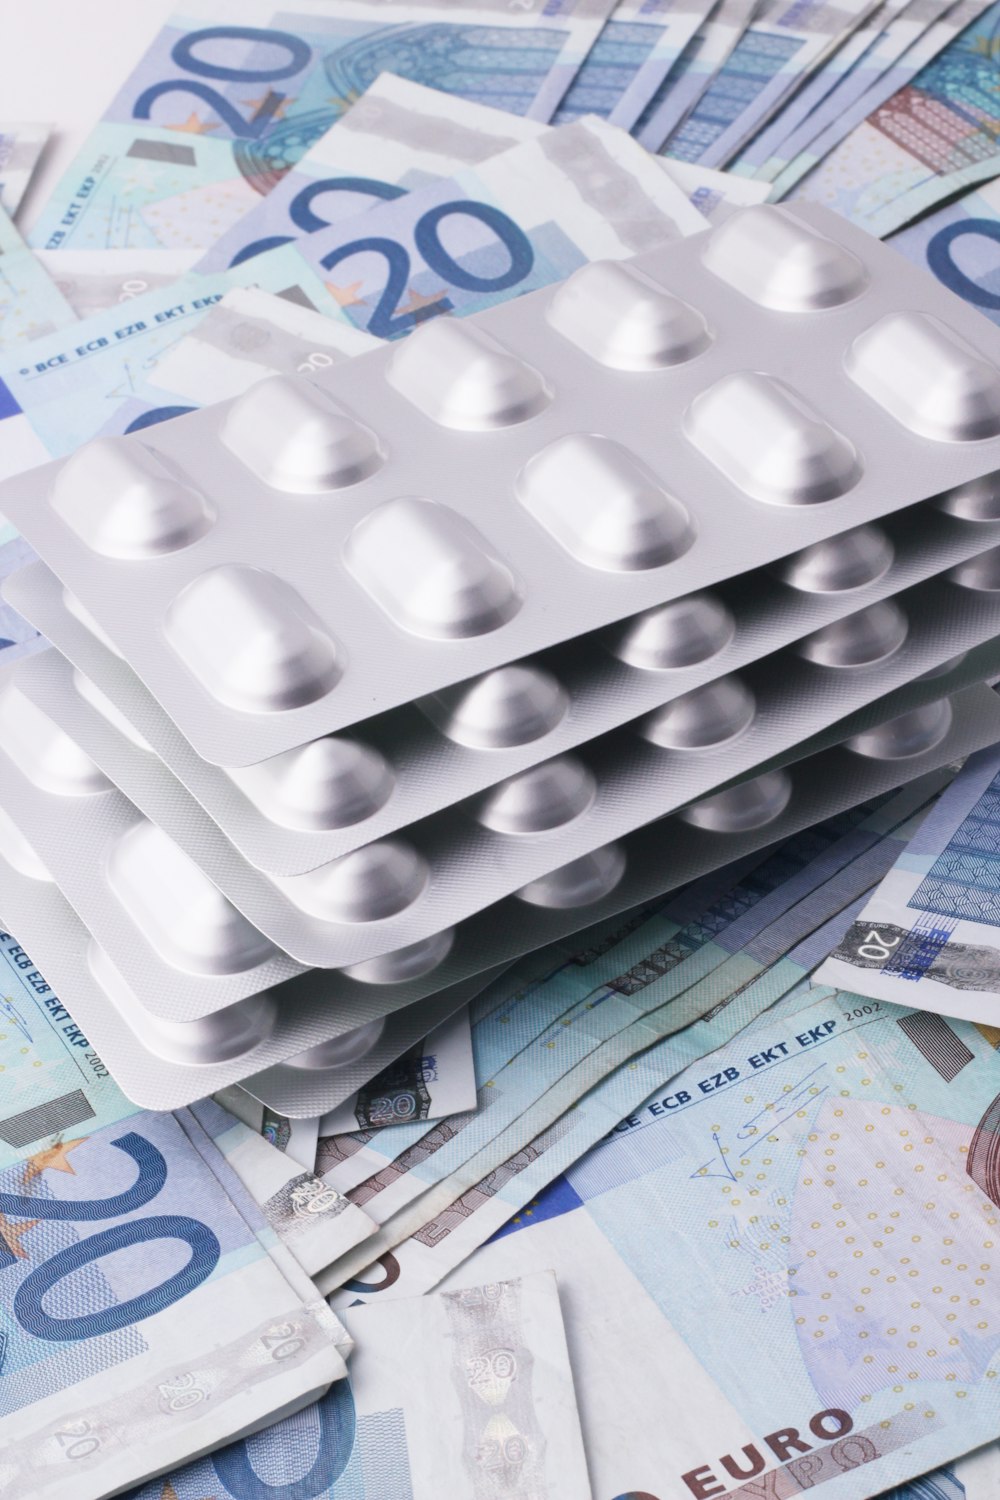 Tablets and Euros for medical treatment: Does Health Insurance Cover Preventive Care